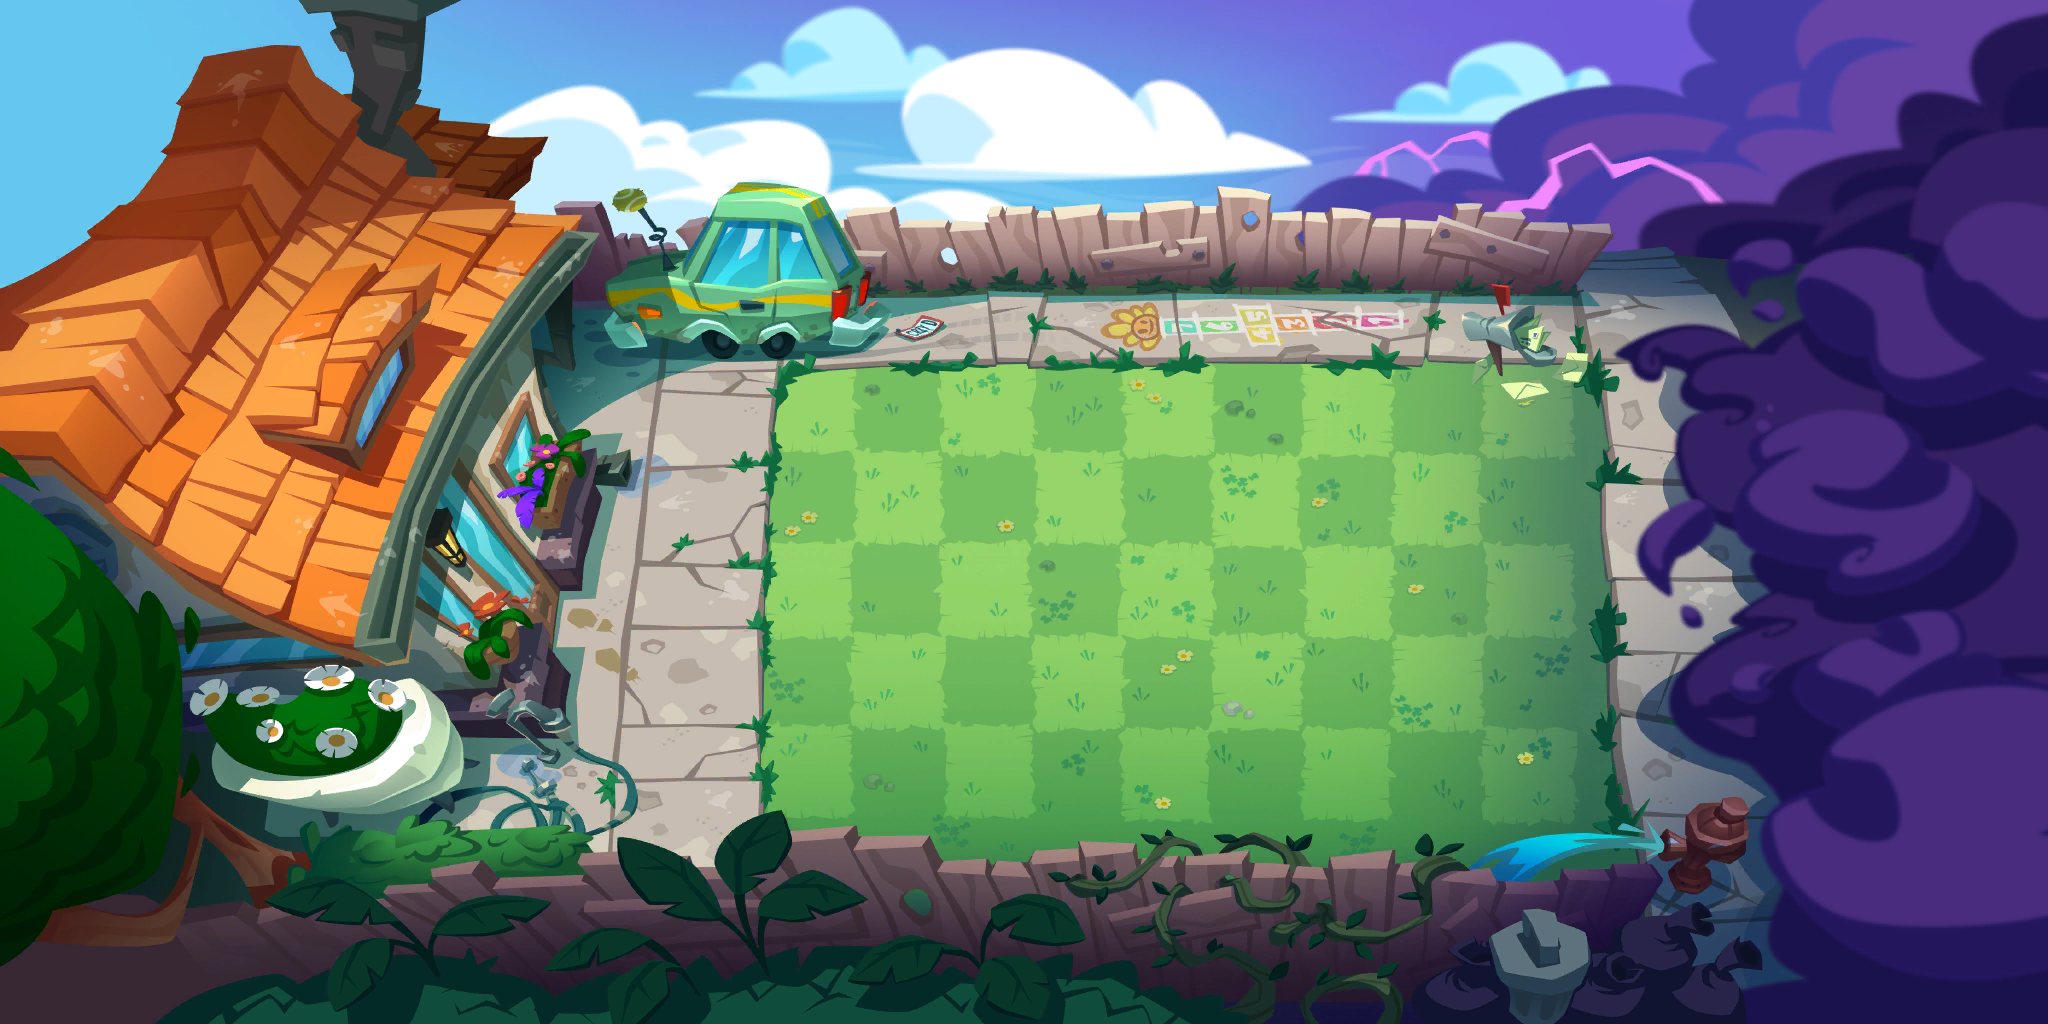 Plants vs. Zombies 3 rises from the dead in new soft-launch